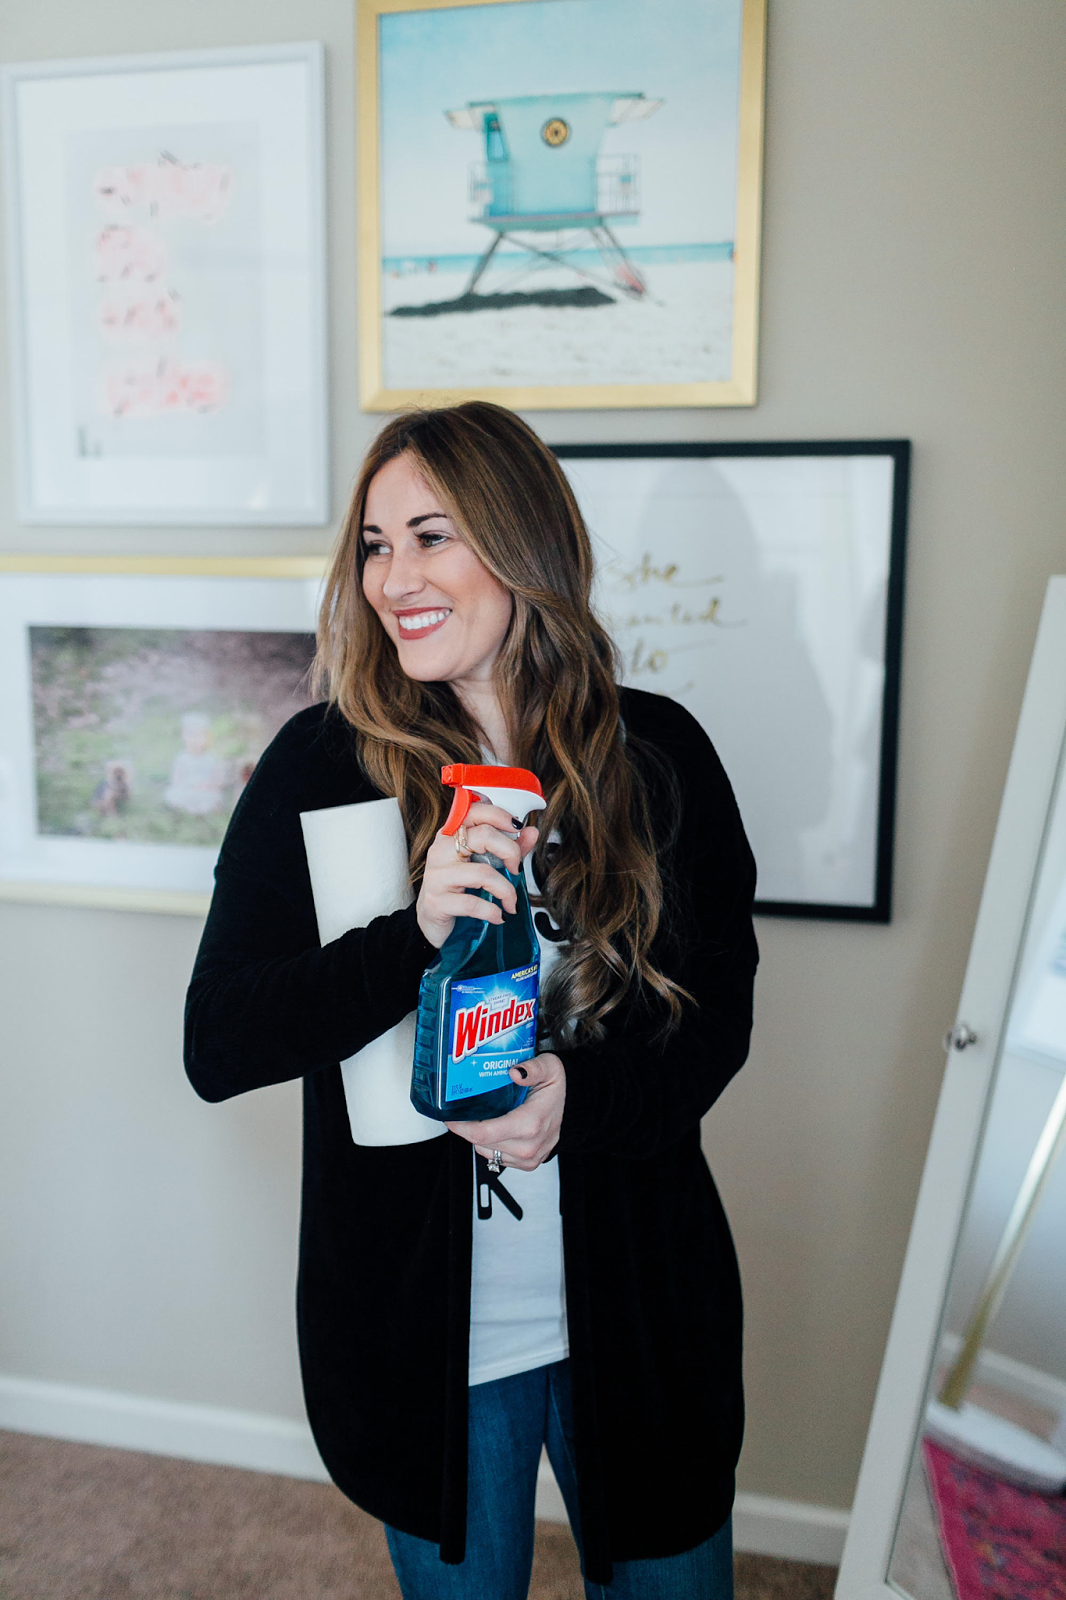 Spring Cleaning Tips to Save Time: 5 Easy Hacks by lifestyle blogger Laura from Walking in Memphis in High Heels